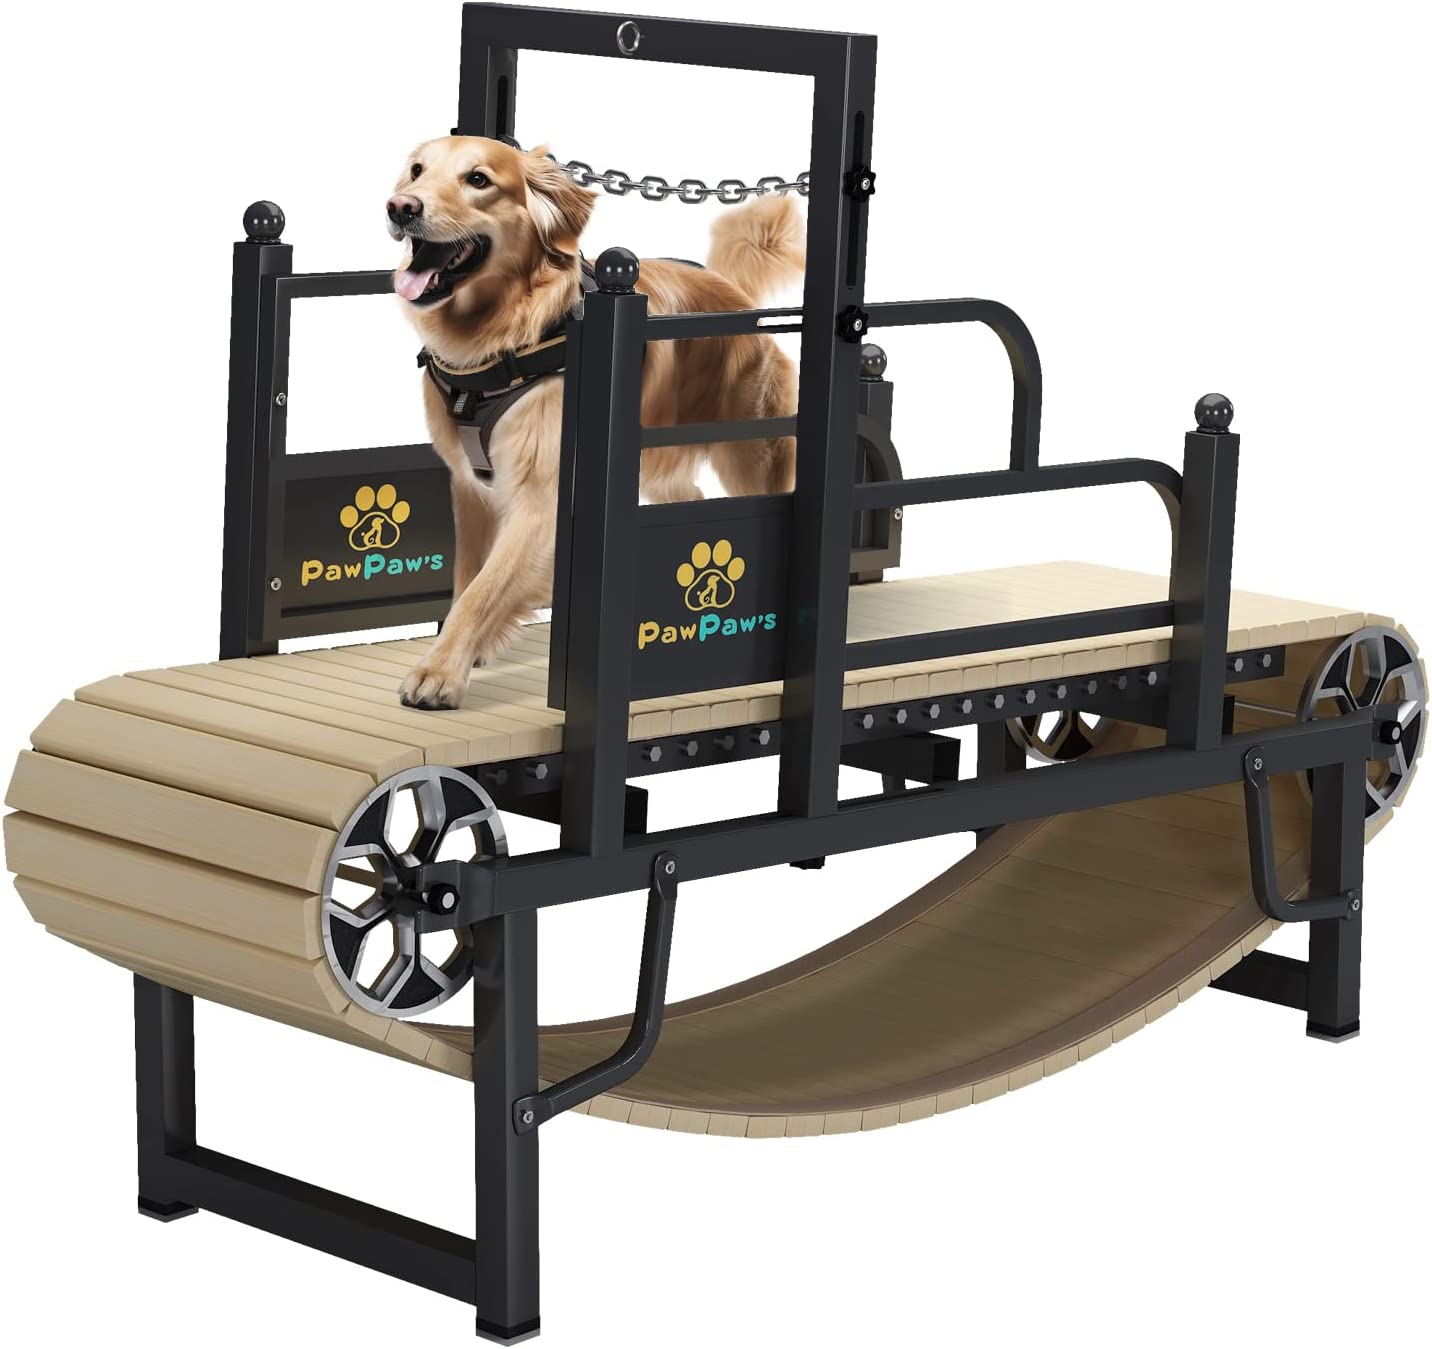 2. PawPaw's Dog Treadmill for Large Dogs